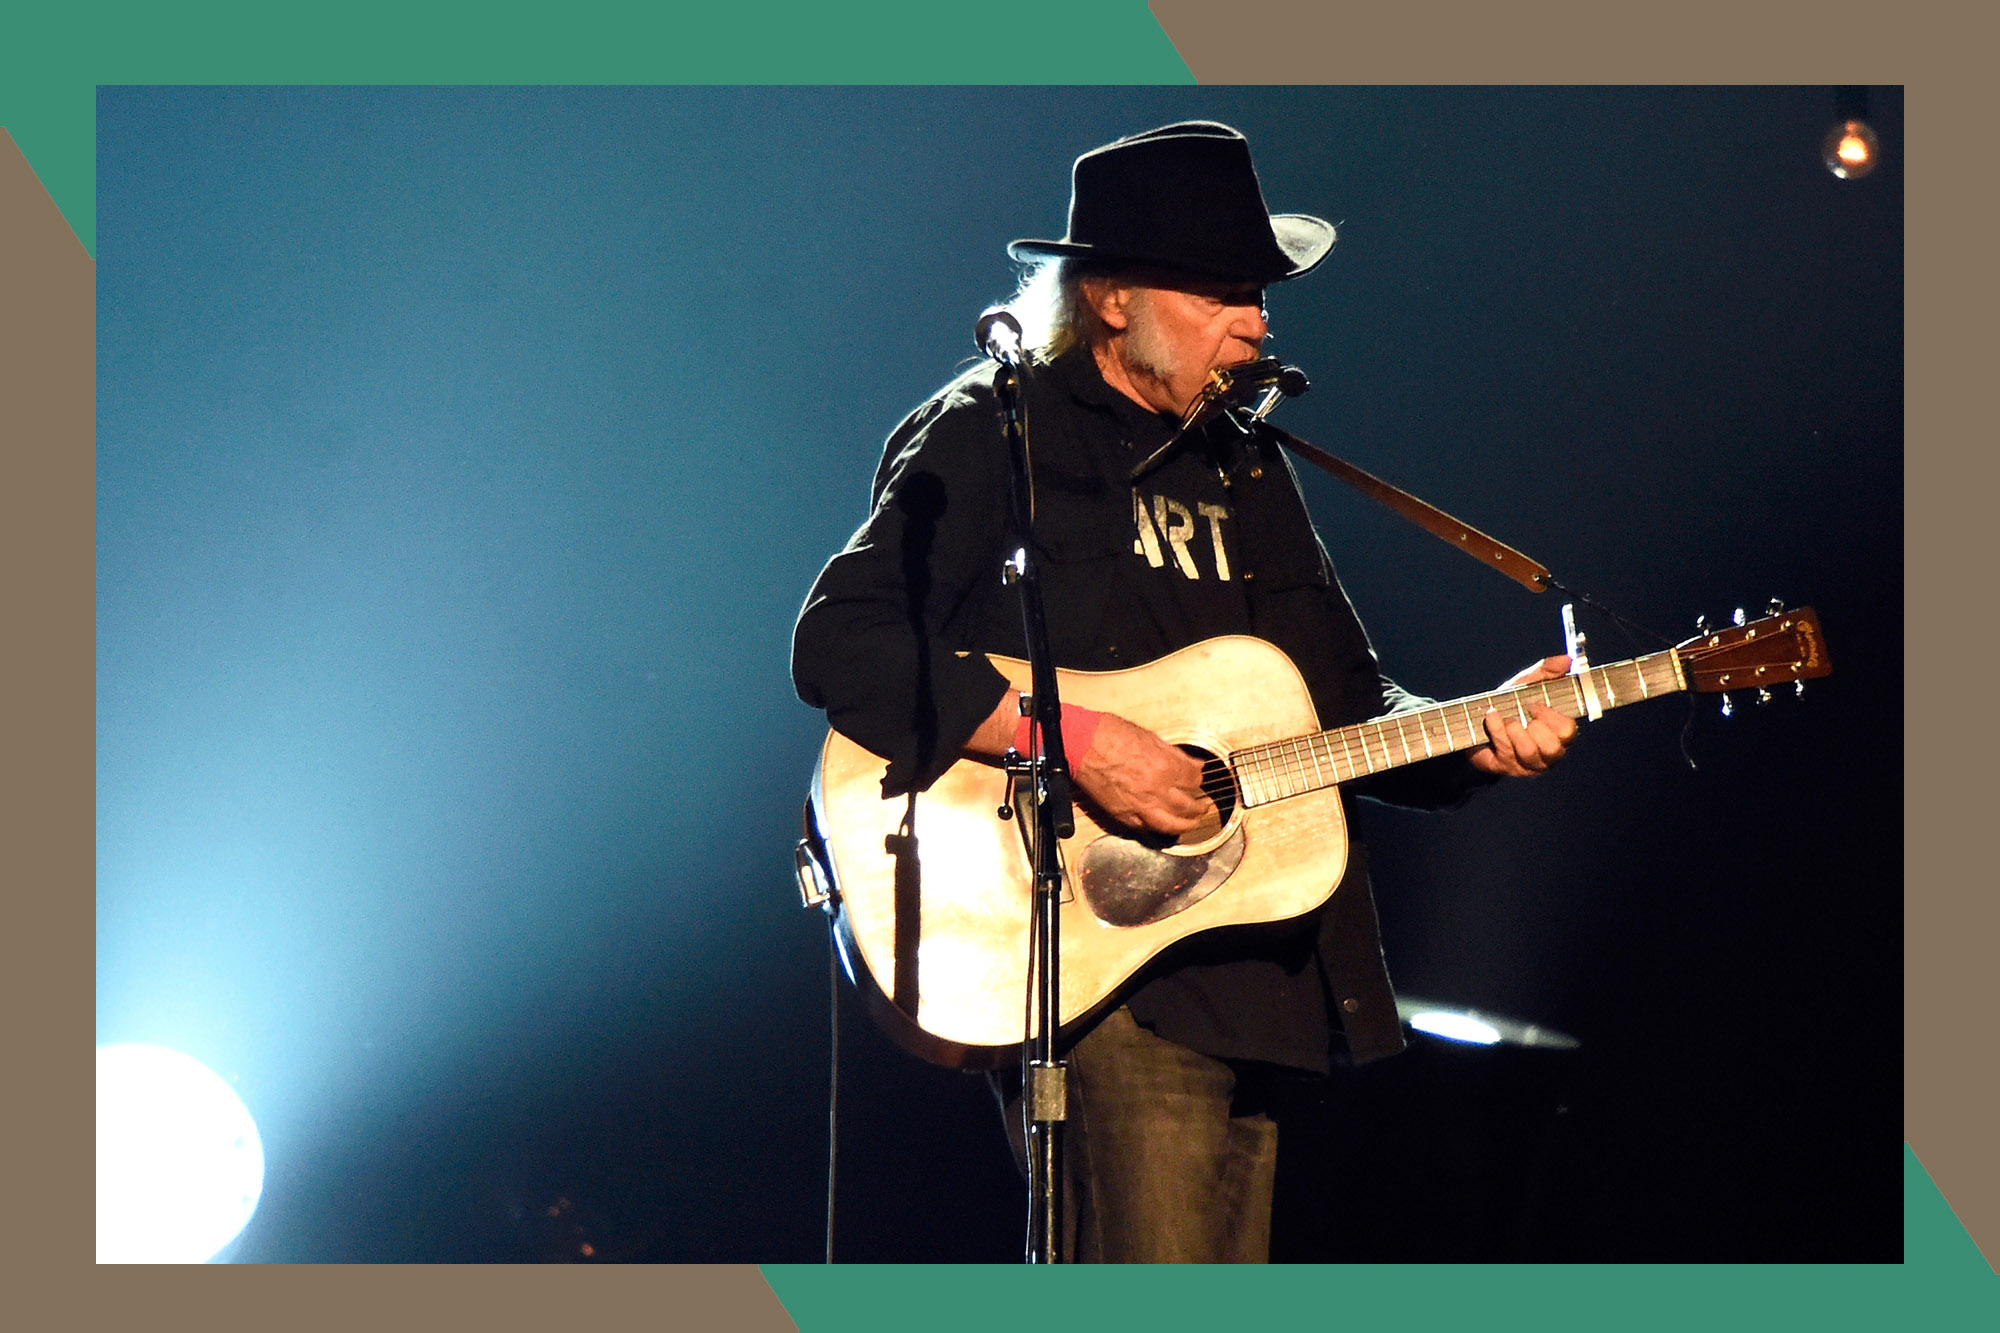 Neil Young plays guitar and harmonica while wearing a cowboy hat.